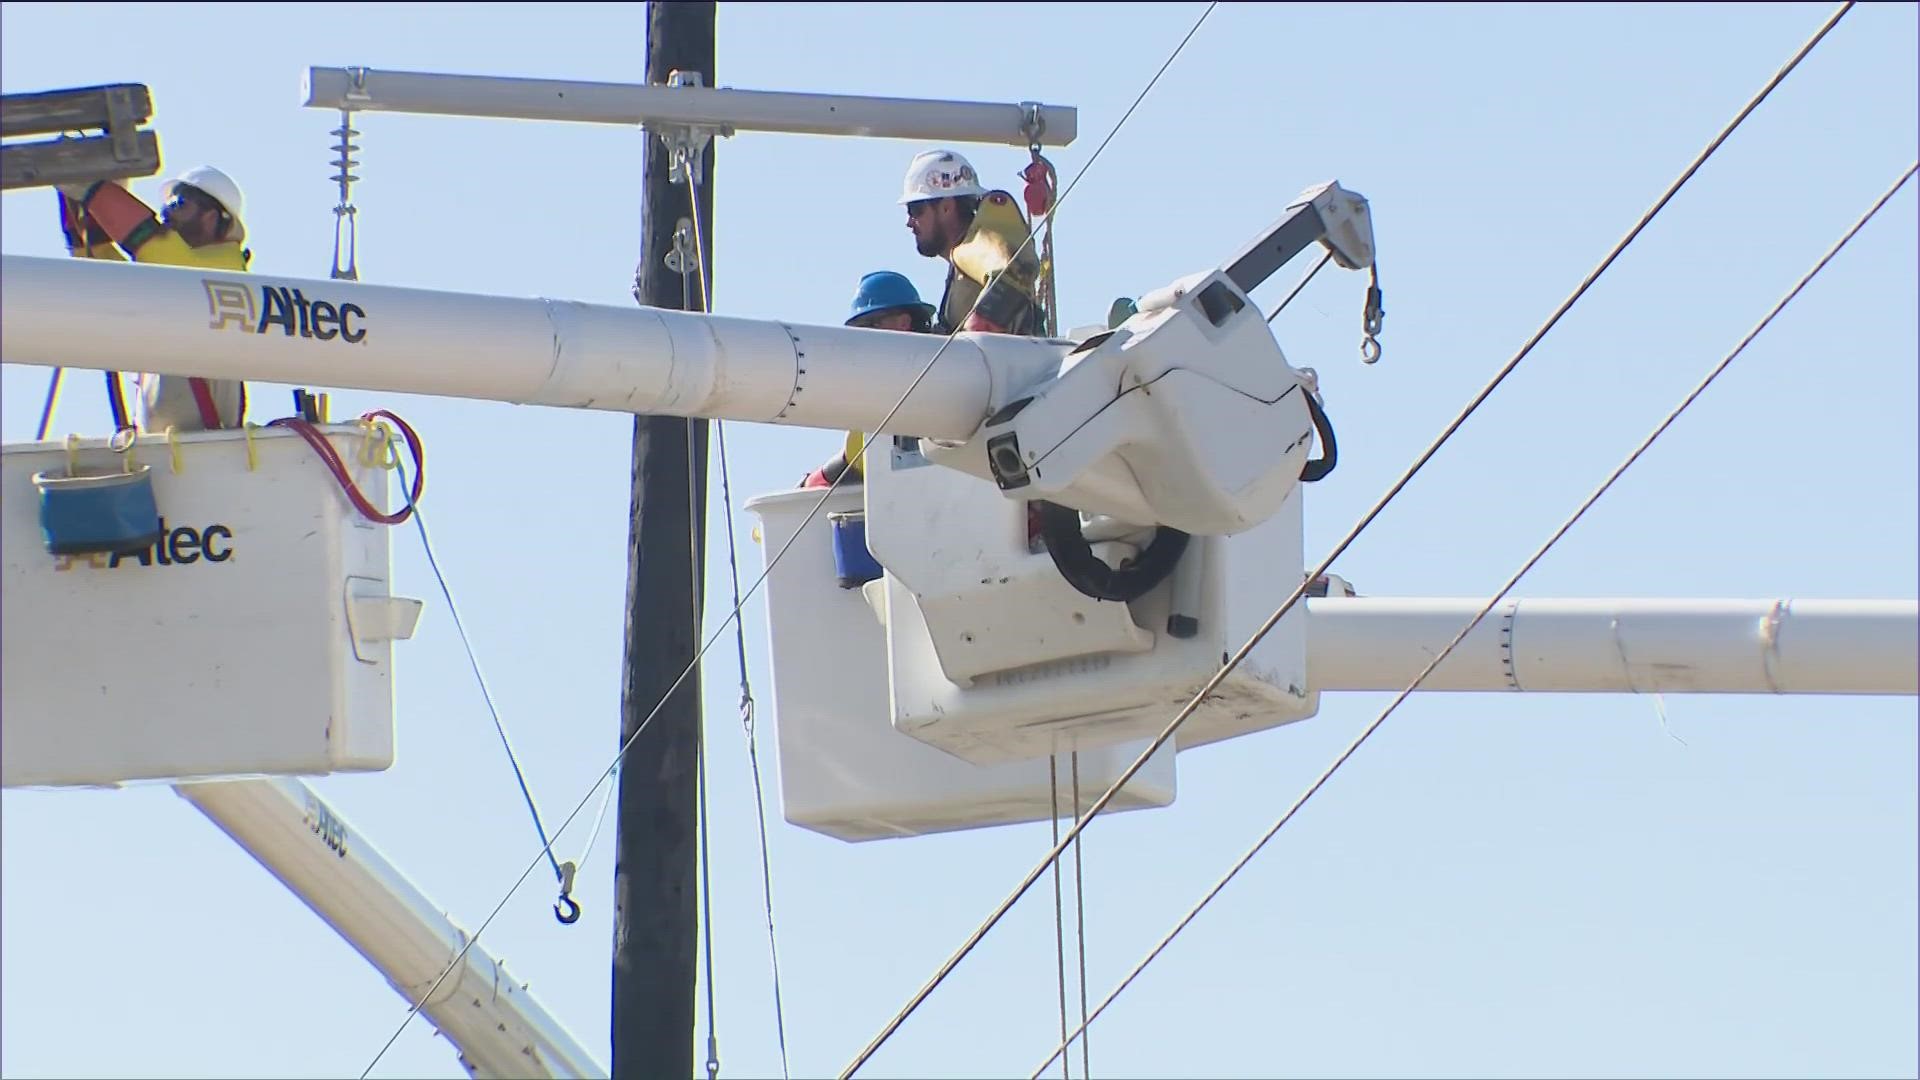 More than 18,000 customers remain without power as of 5 p.m. Monday. Austin Energy’s general manger said she’s sorry that restoration is taking so long.